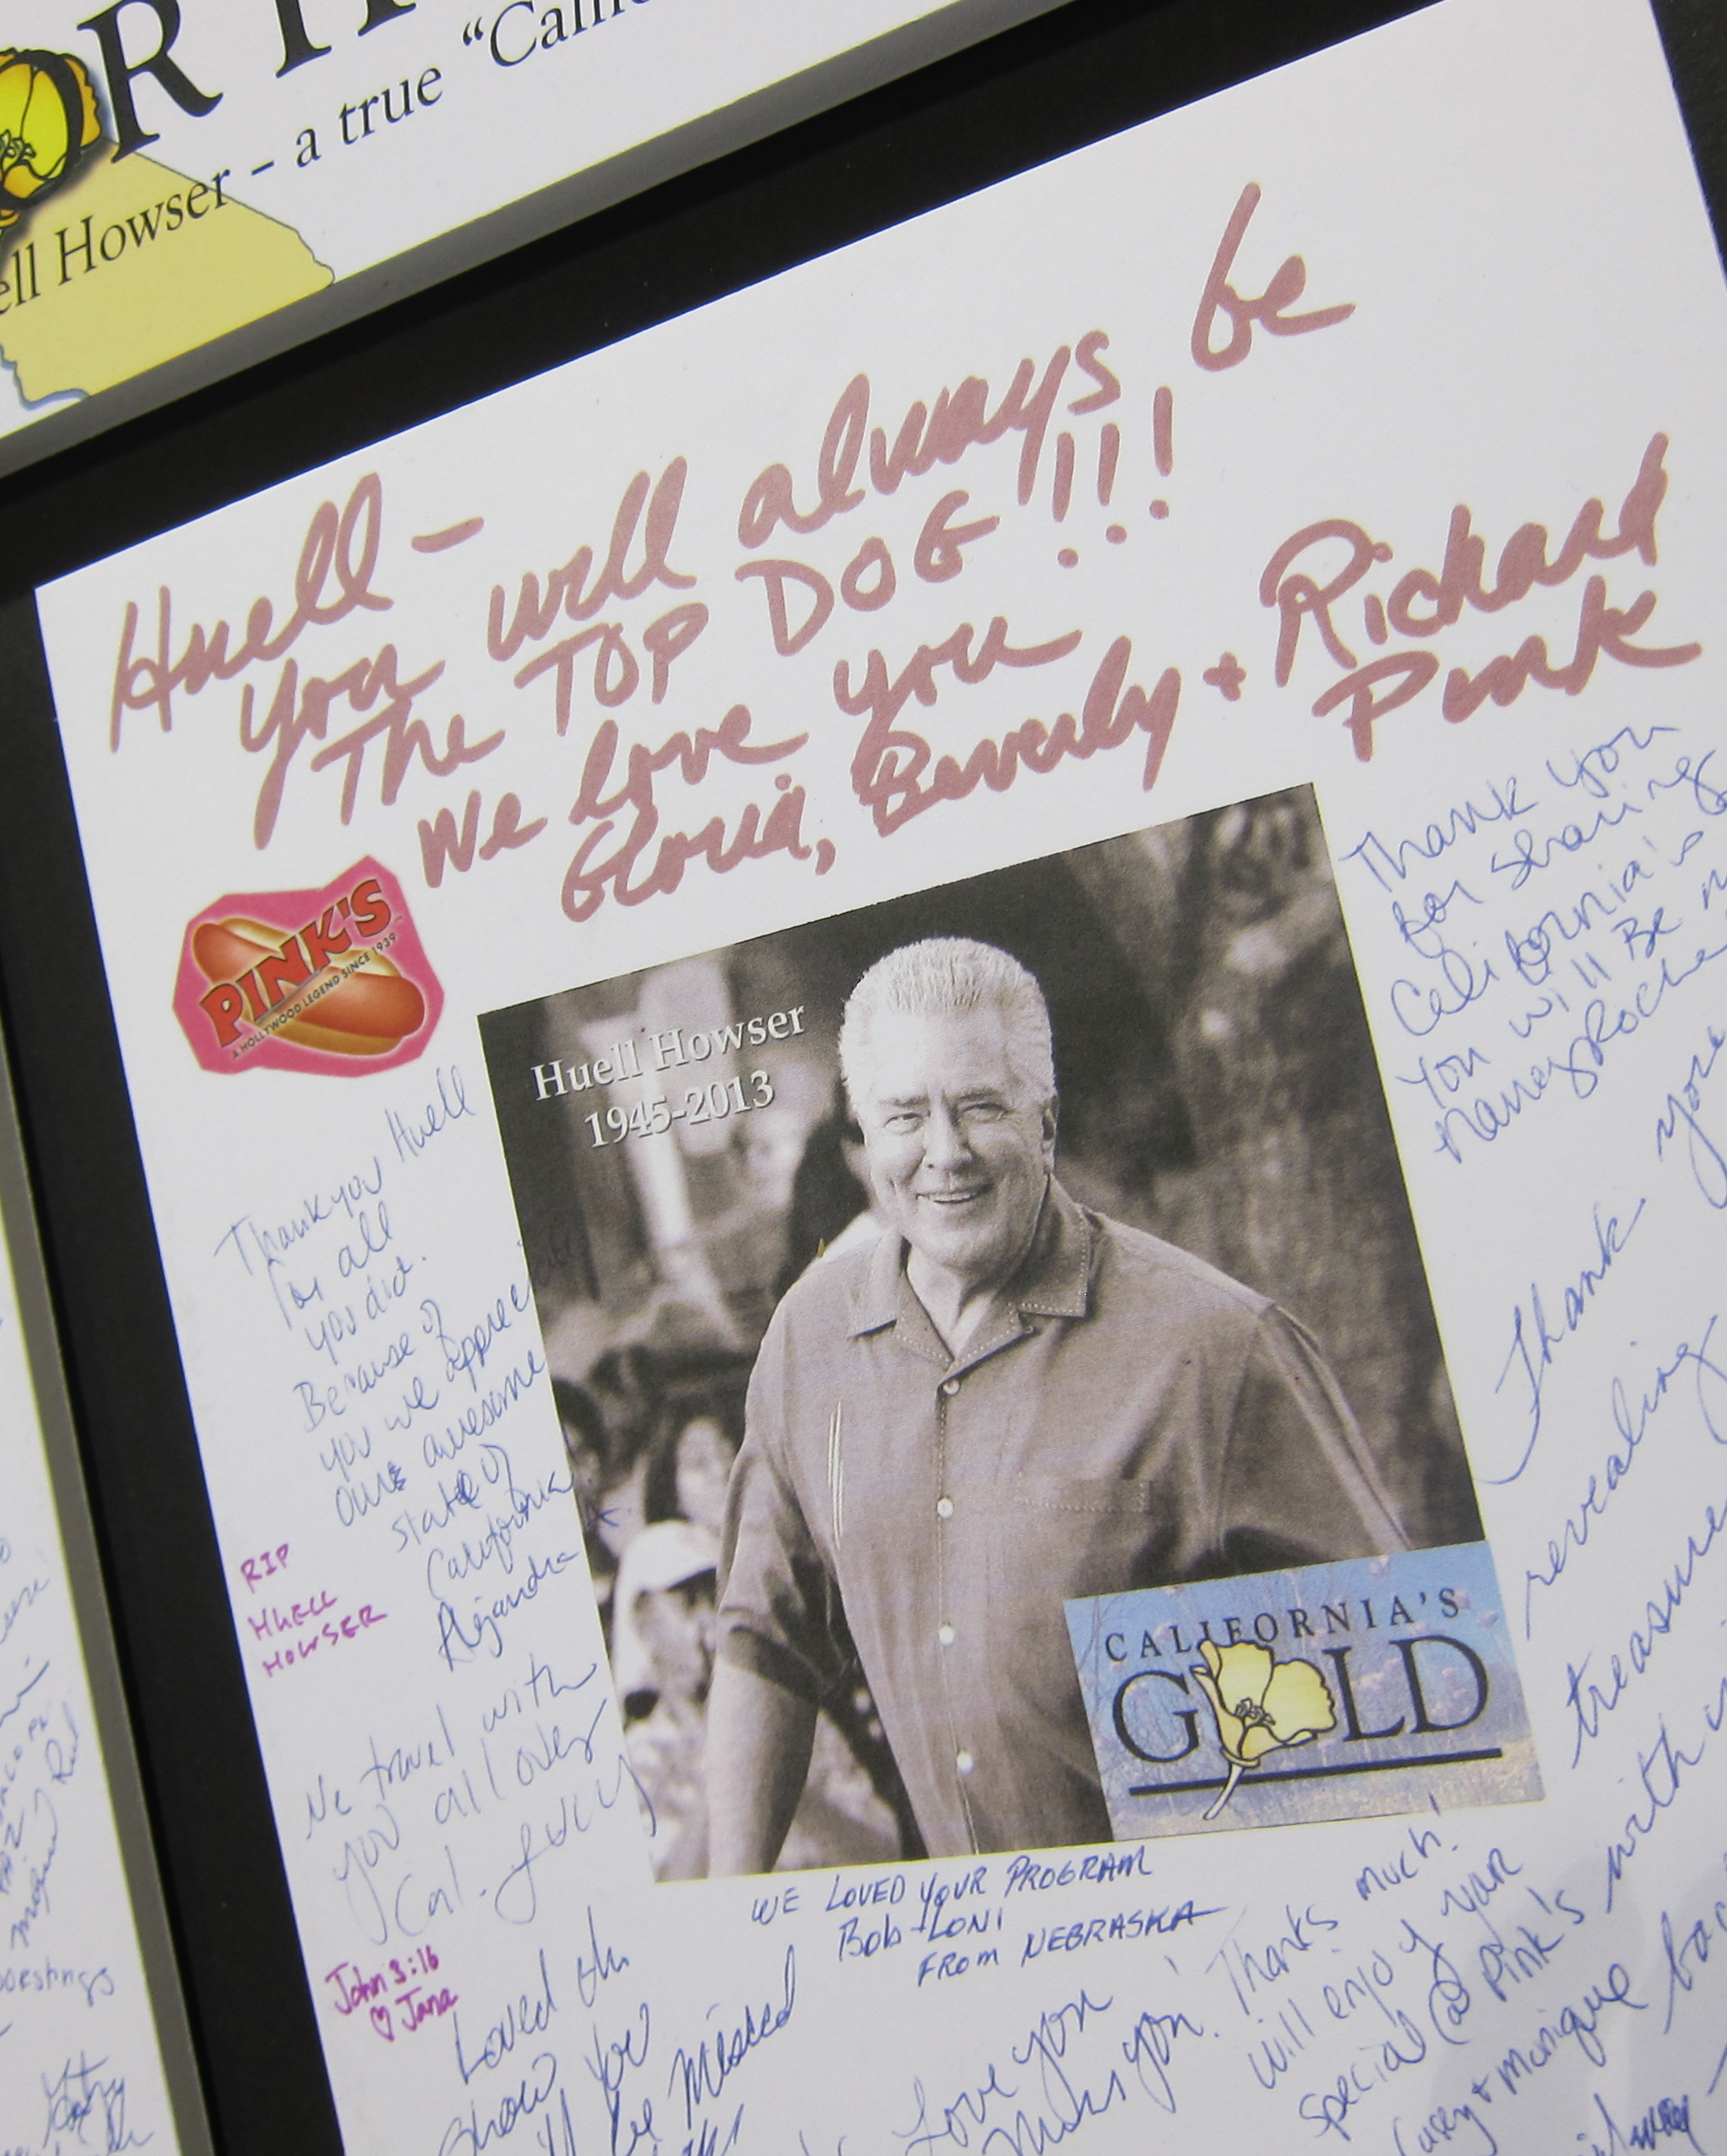 The Pink family, who famously created the 'Huell Dog,' were among those who signed celebration posters.